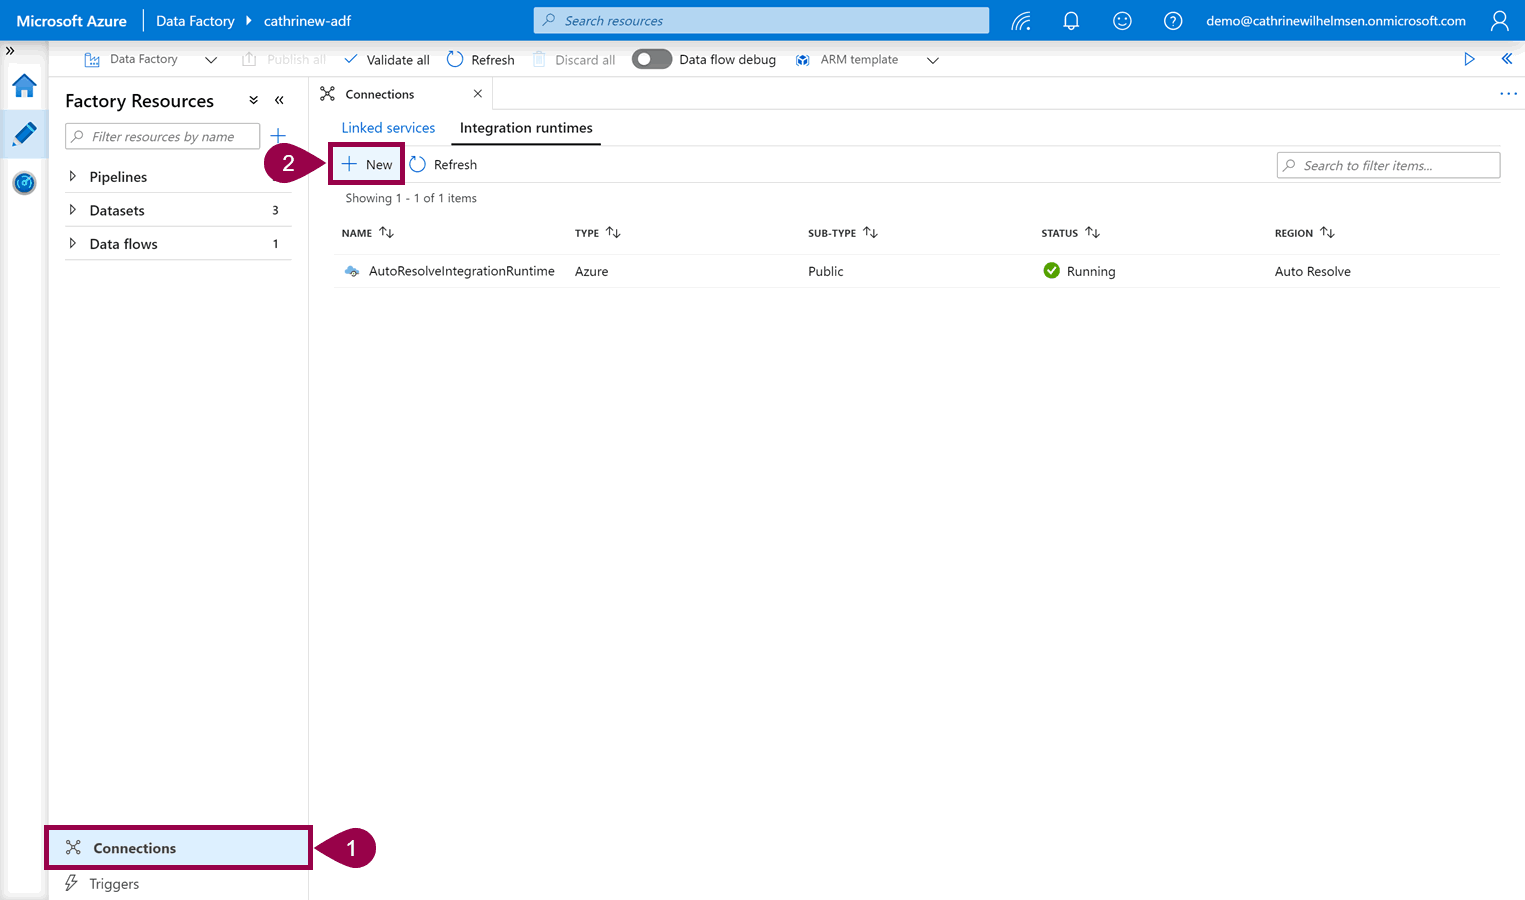 Screenshot of the Azure Data Factory interface with the integration runtimes open, highlighting the new integration runtime button